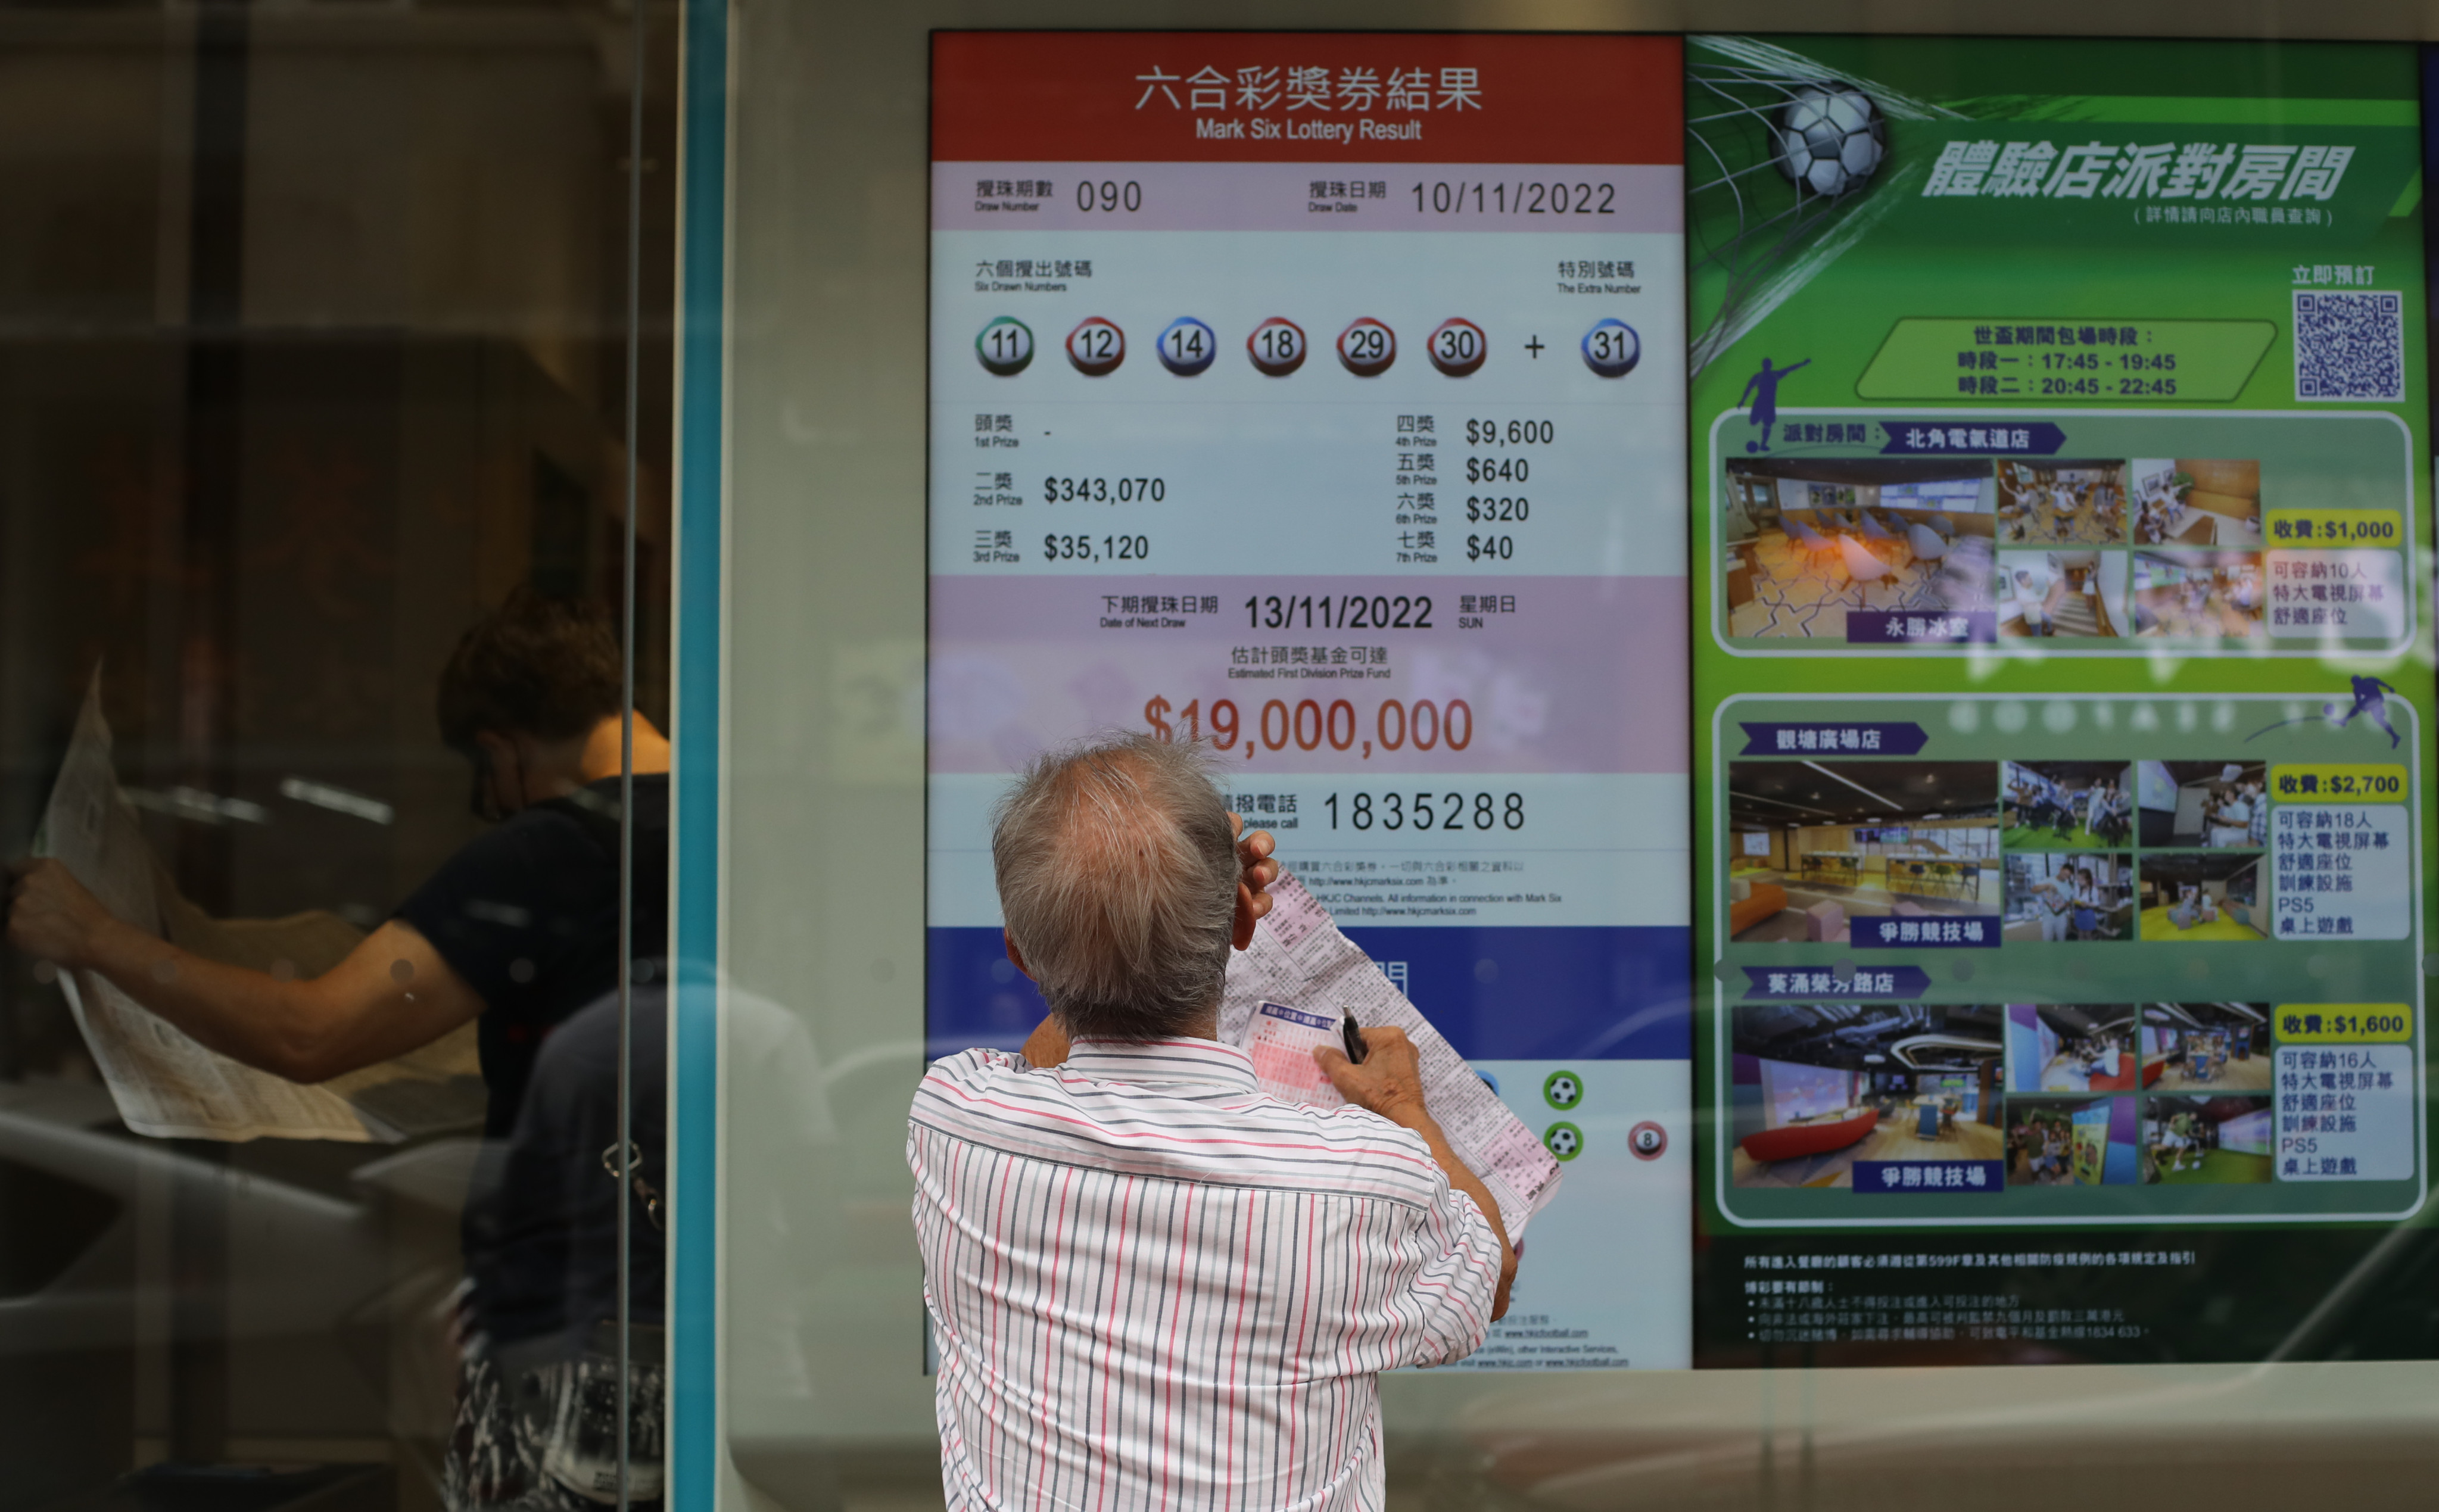 A punter in Yau Ma Tei outside one of the Jockey Club’s outlets. Photo: Xiaomei Chen